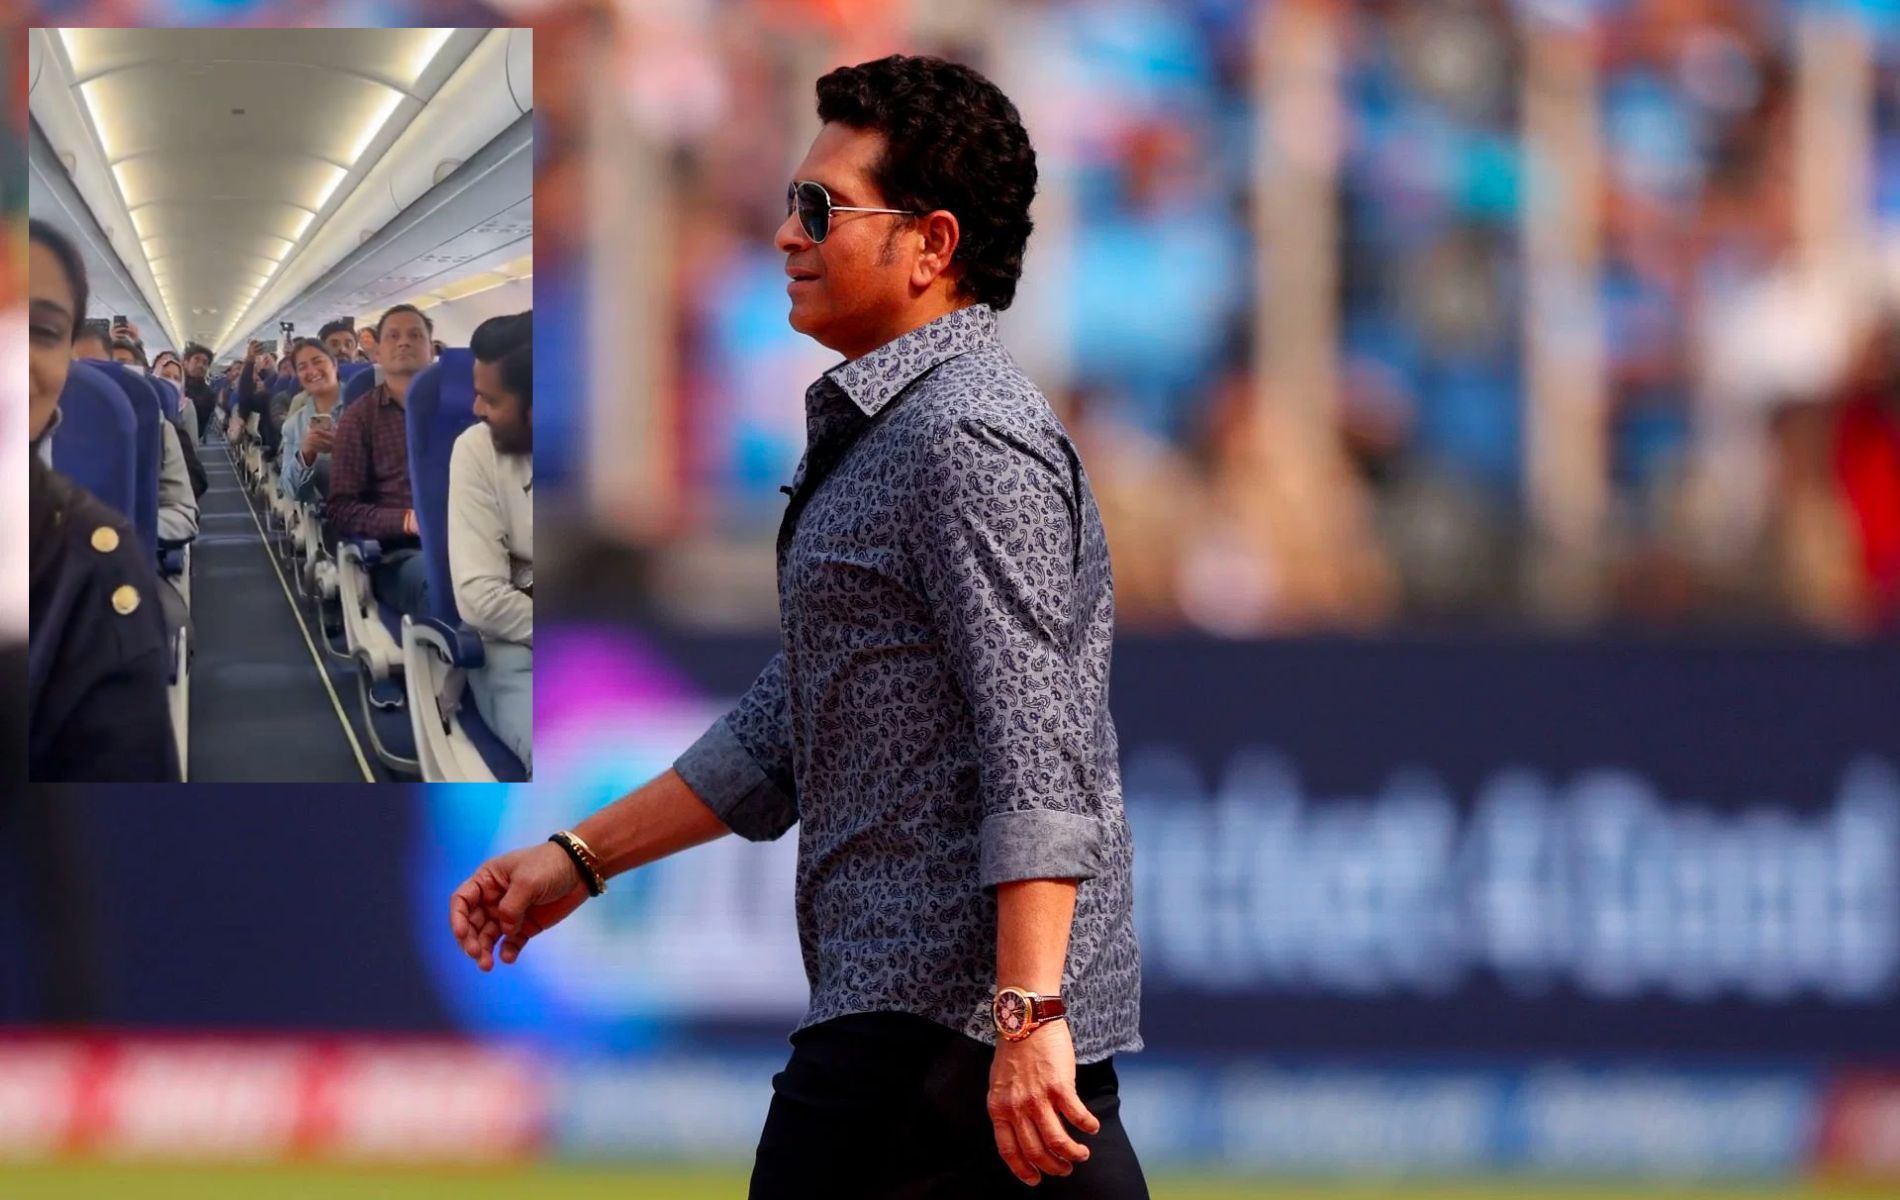 Fans in the airplane were thrilled to catch a glimpse of Sachin Tendulkar.